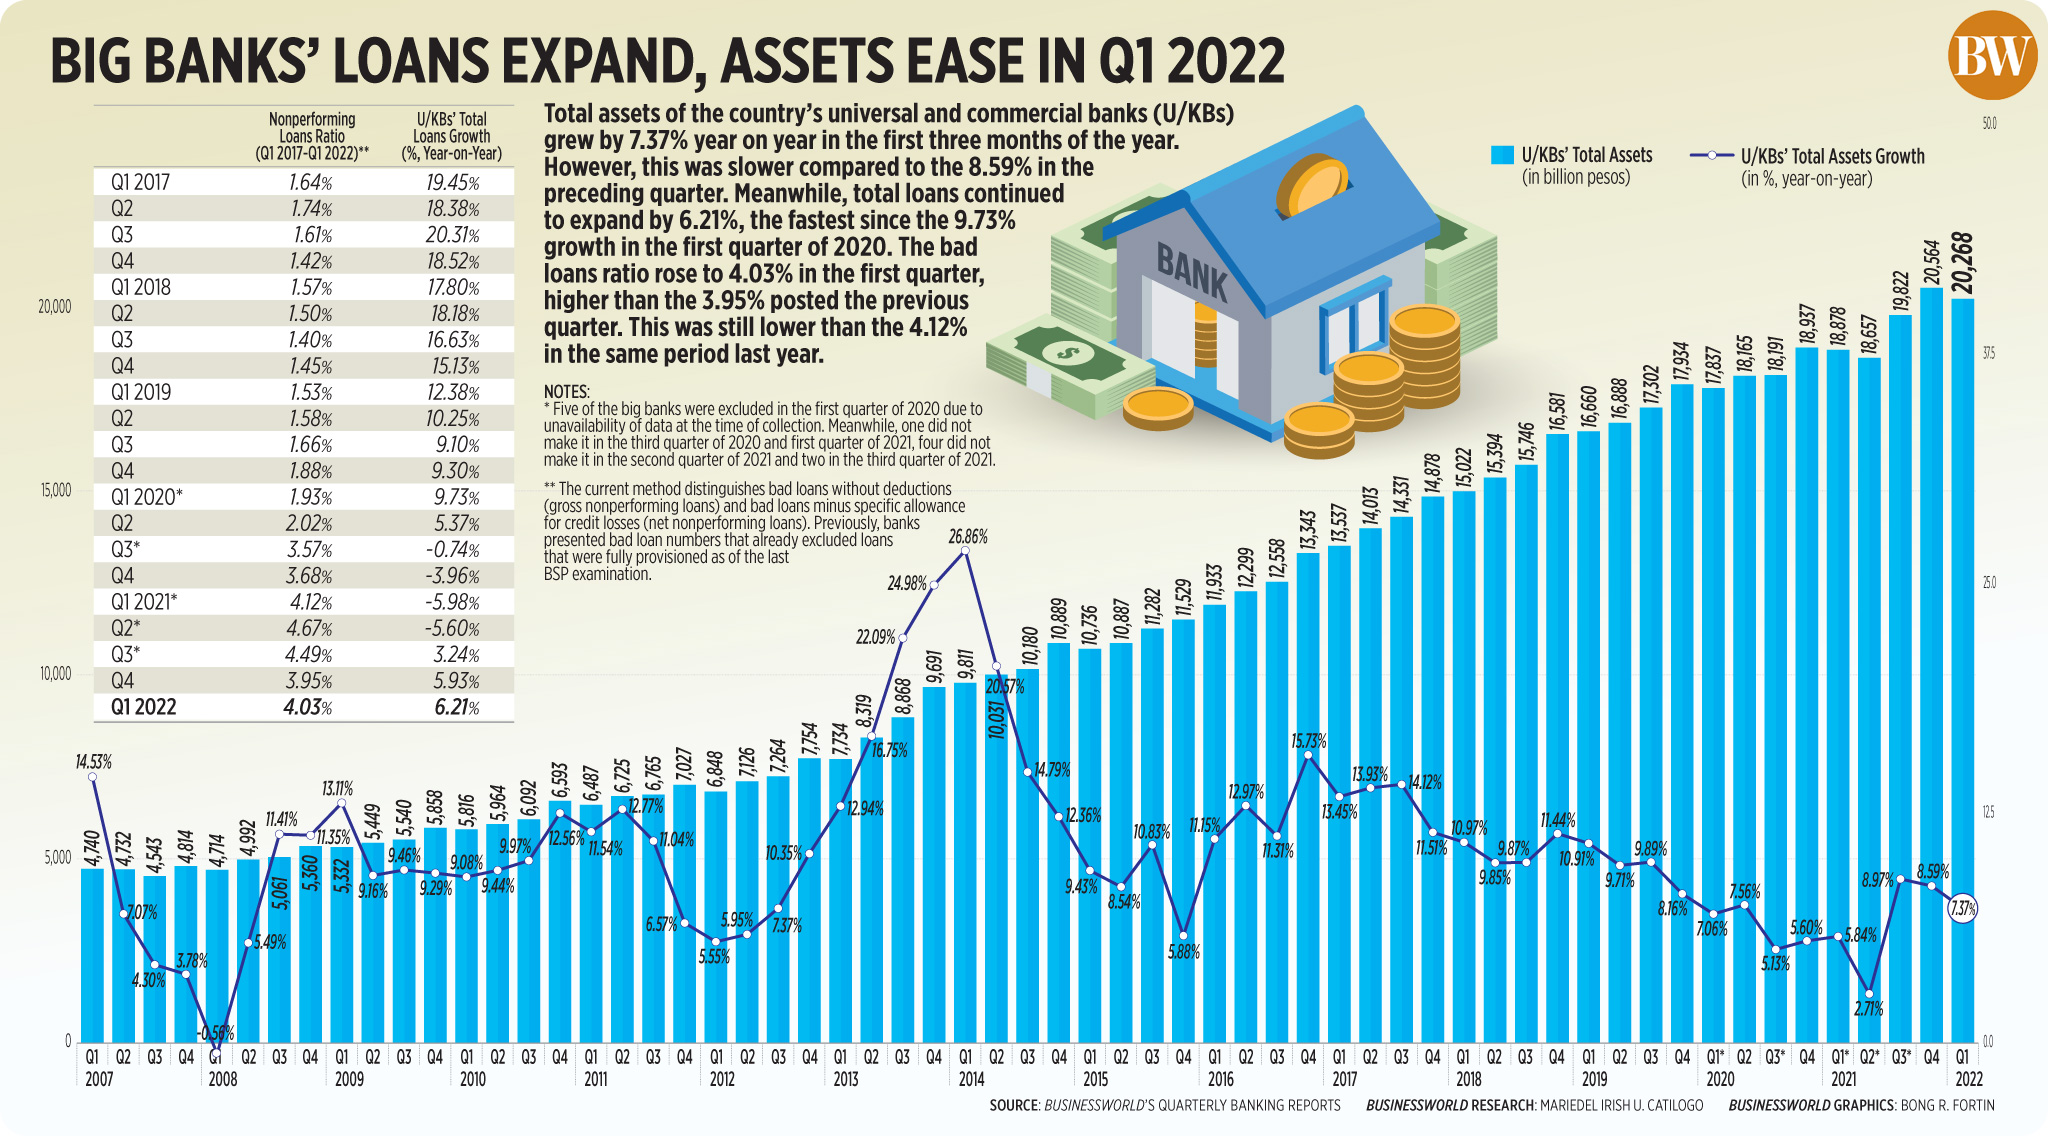 Big banks’ loans expand, assets ease in Q1 2022